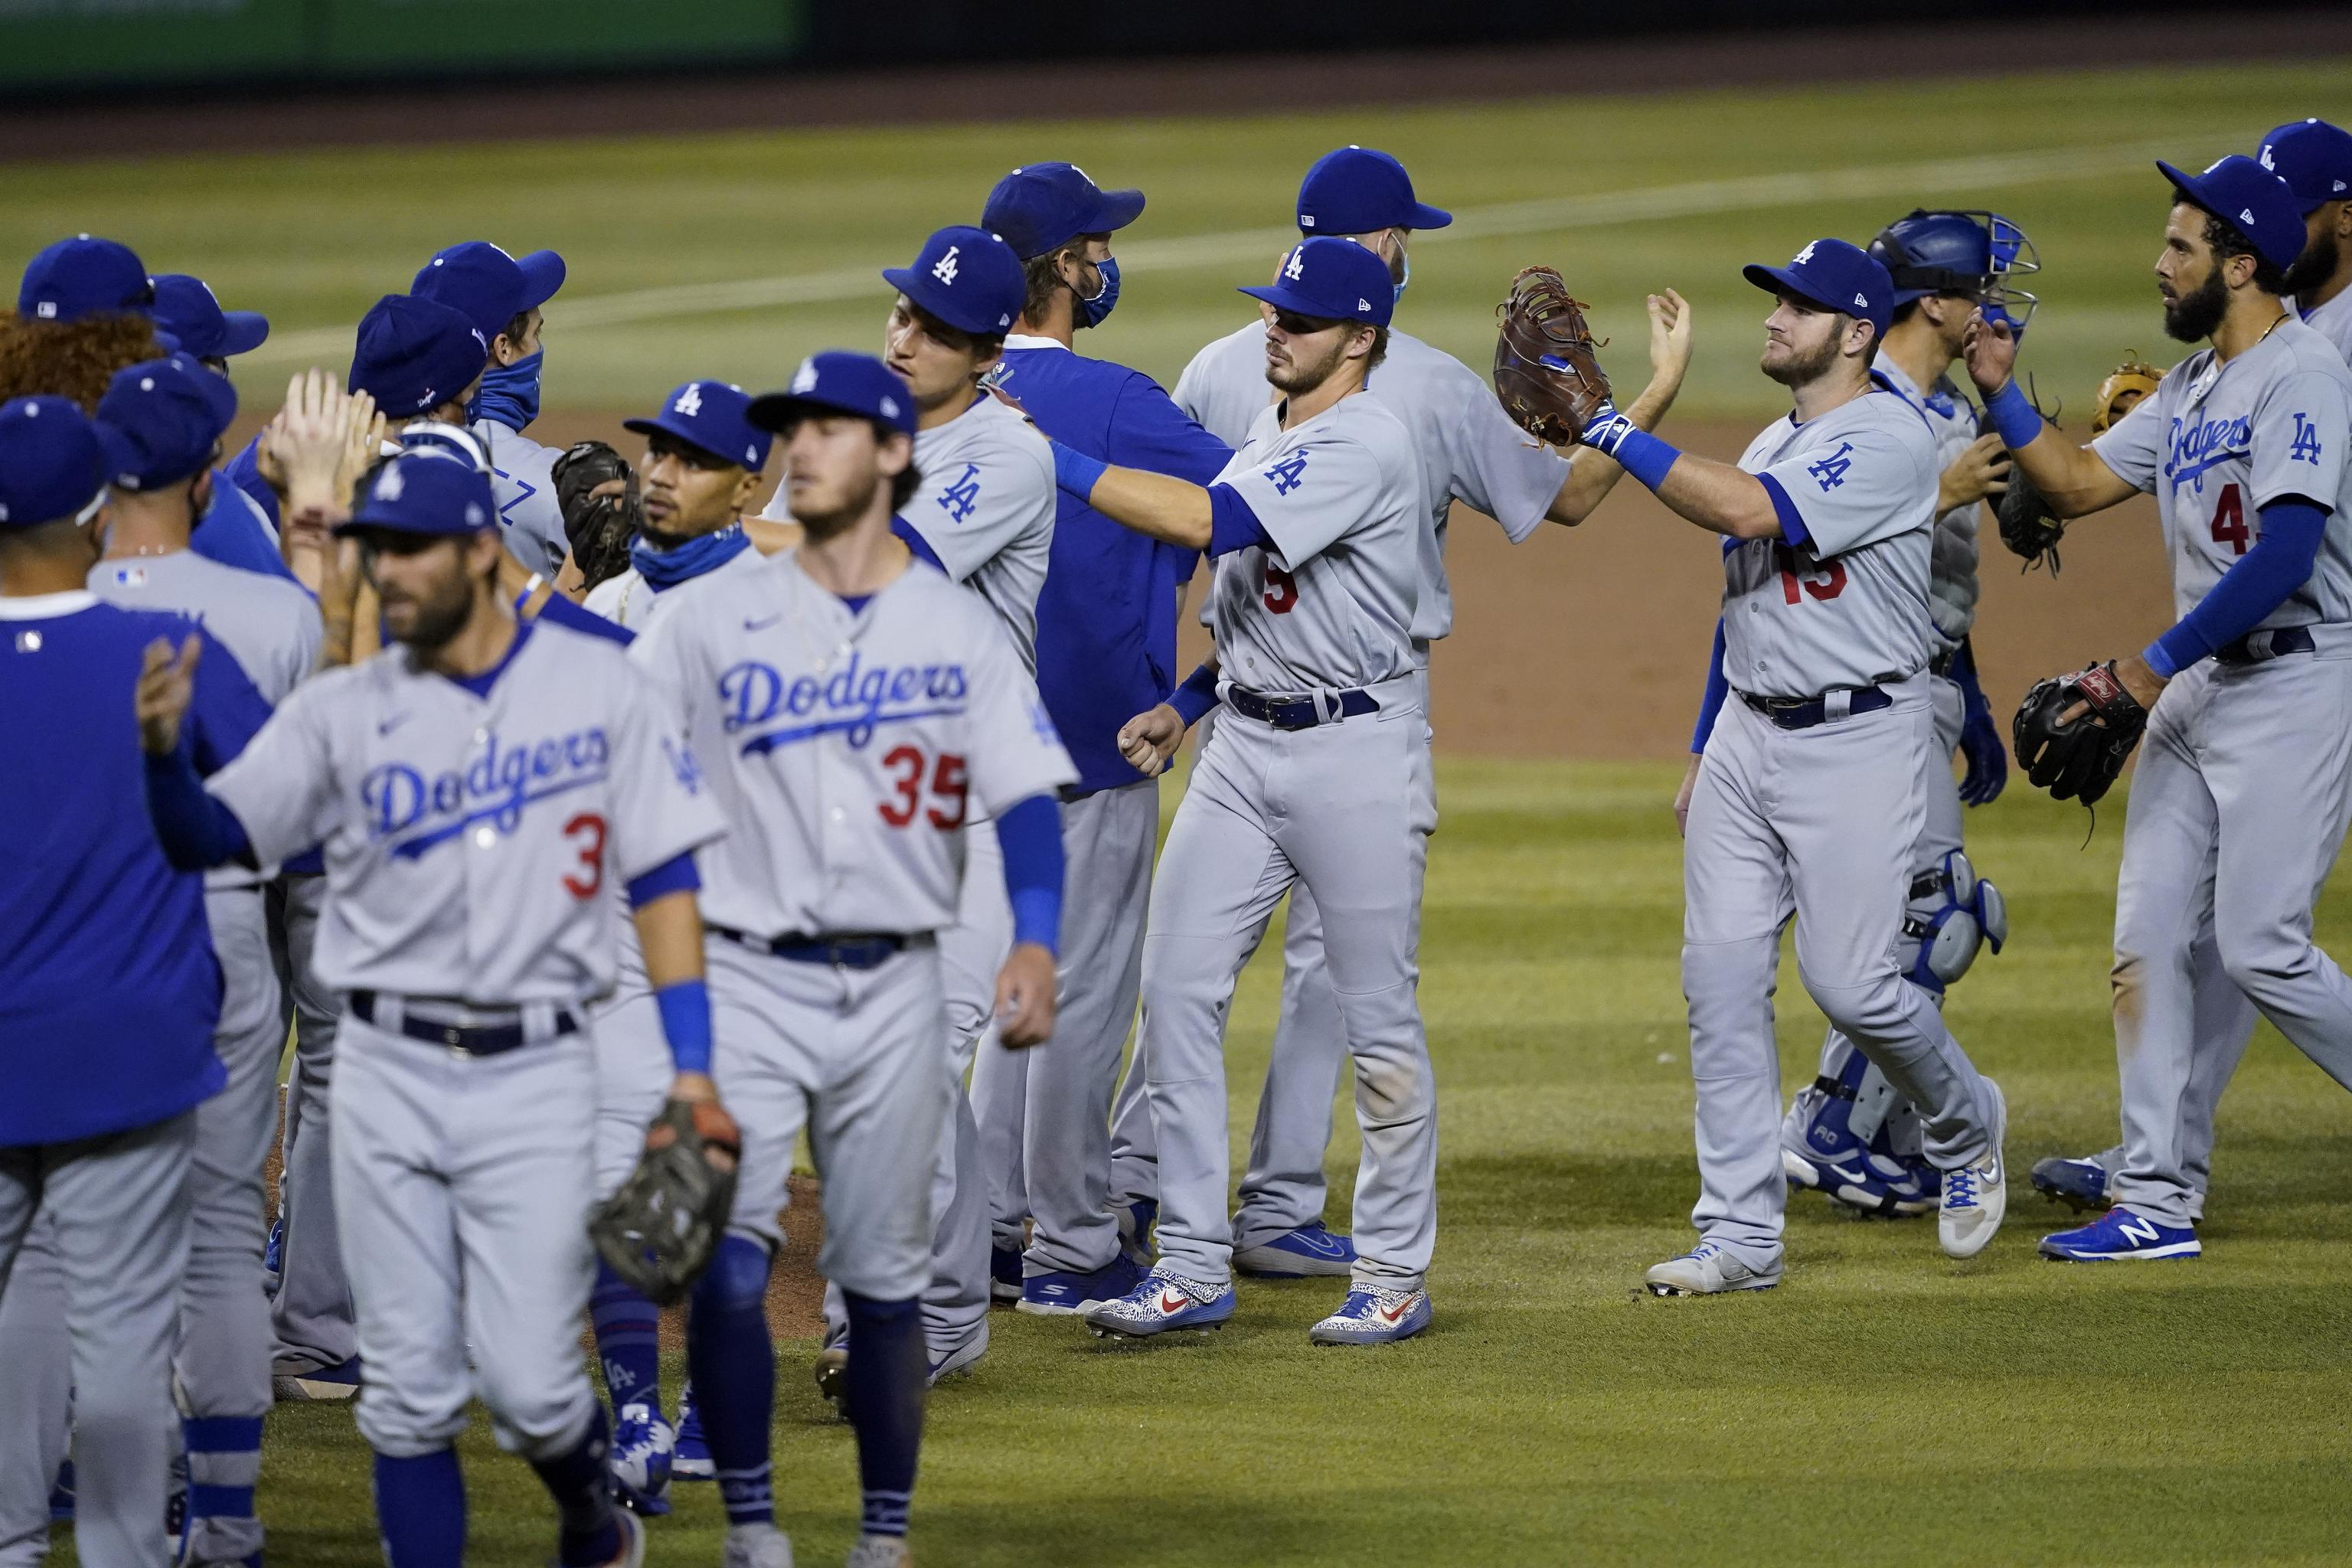 Dodgers 1st team to clinch a playoff spot, rout Padres 11-2